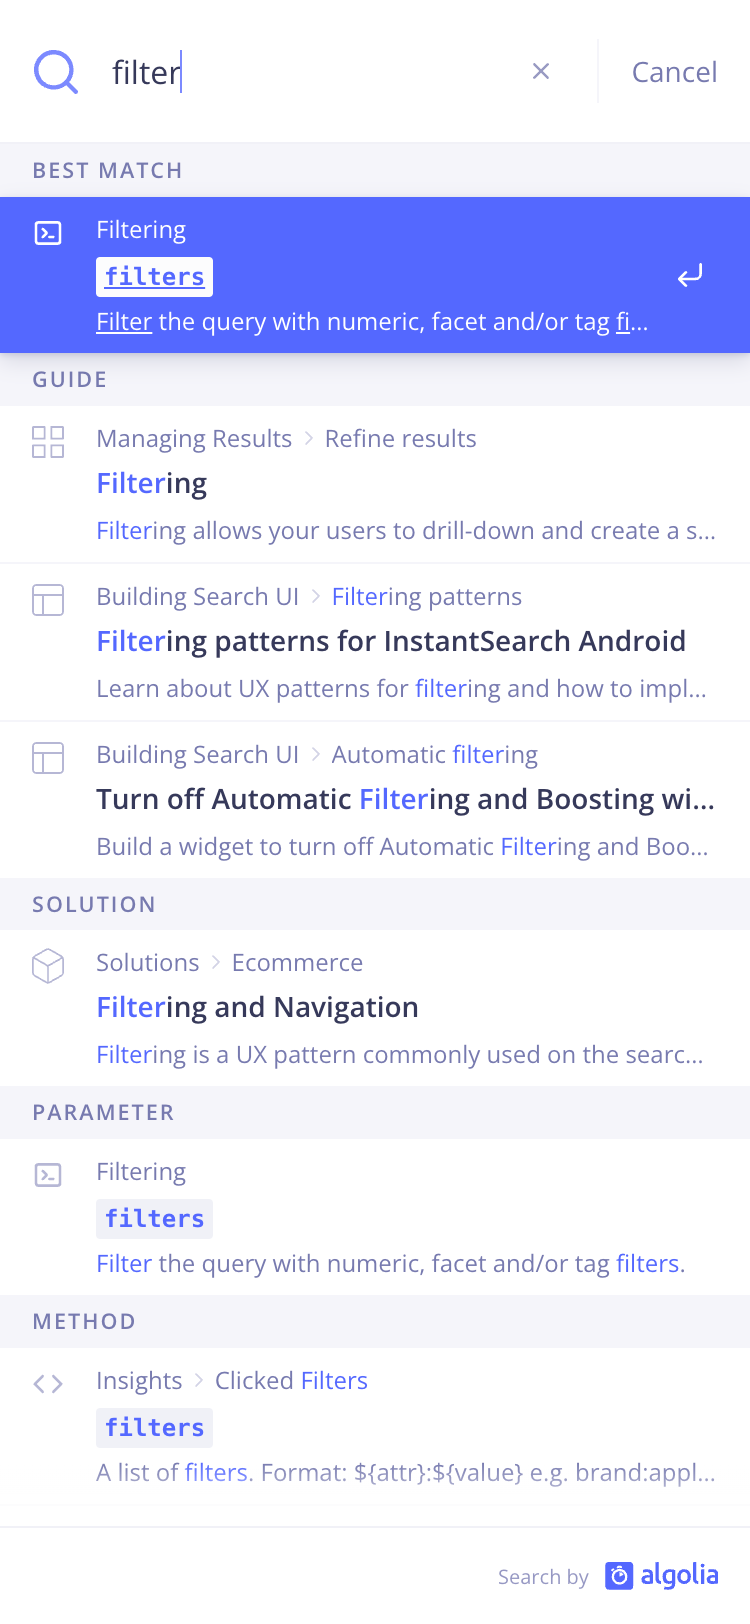 A mobile screenshot of the Algolia documentation search modal. The user has searched for the 'filter' keyword and the results are listed below the search input. The active result is highlighted in blue.